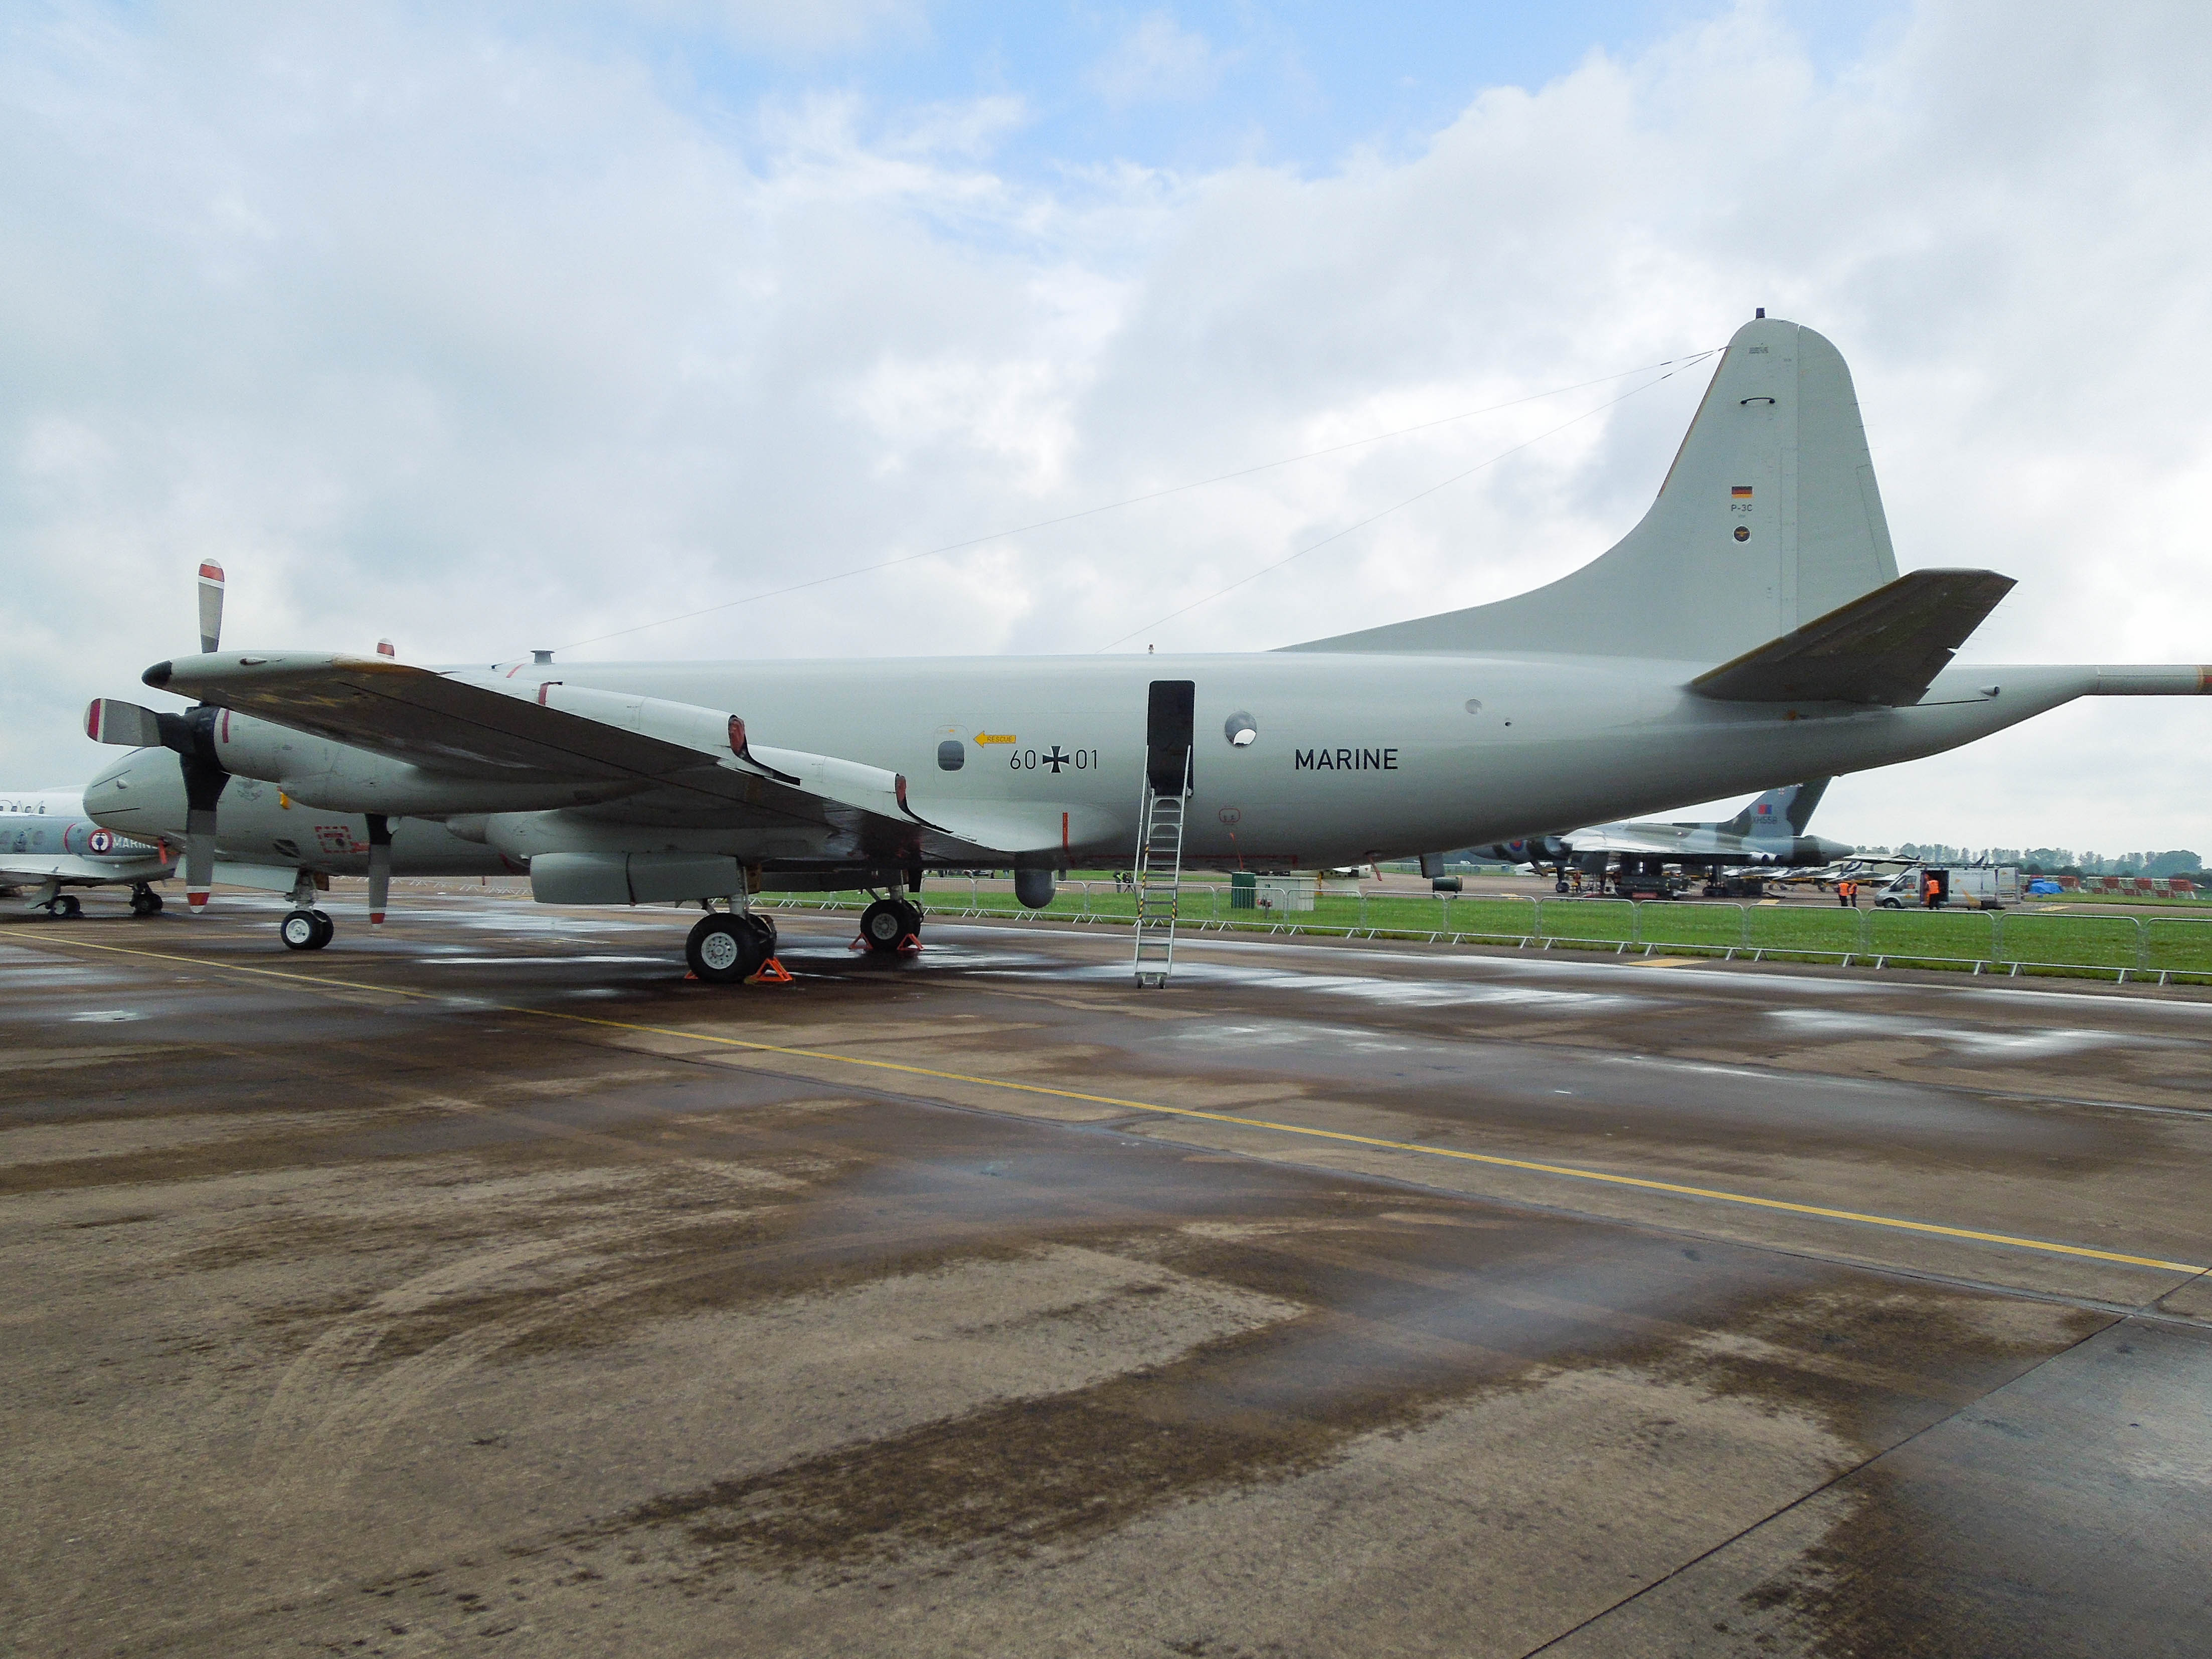 60+01/60+01 German Navy Lockheed P-3C CUP Orion Photo by colinw - AVSpotters.com